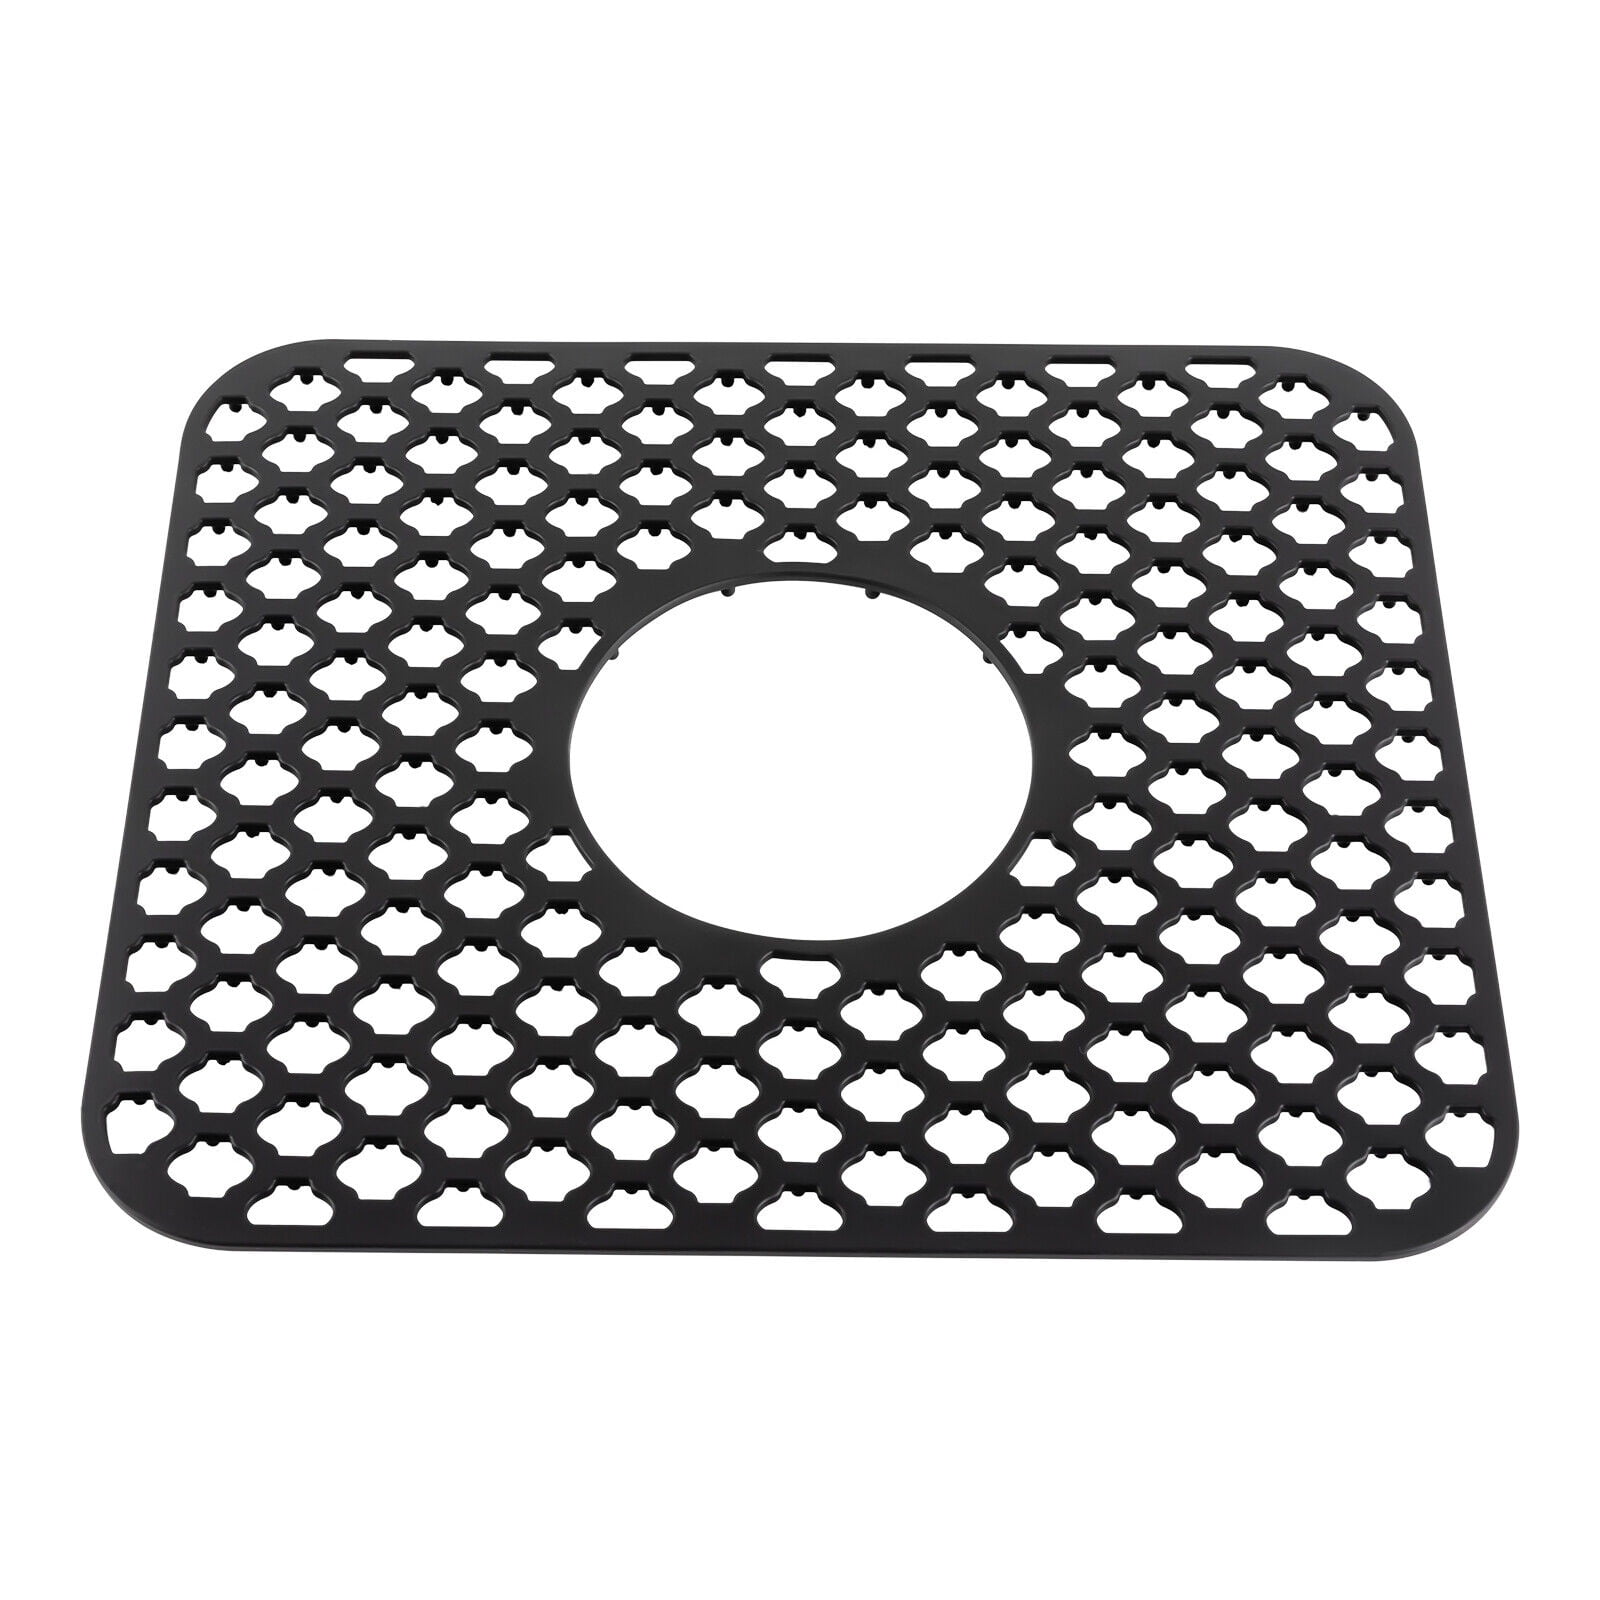 2x Kitchen Sink Mat Non-Slip Silicone Drain Pad Protector Food Drainer  13.5*11